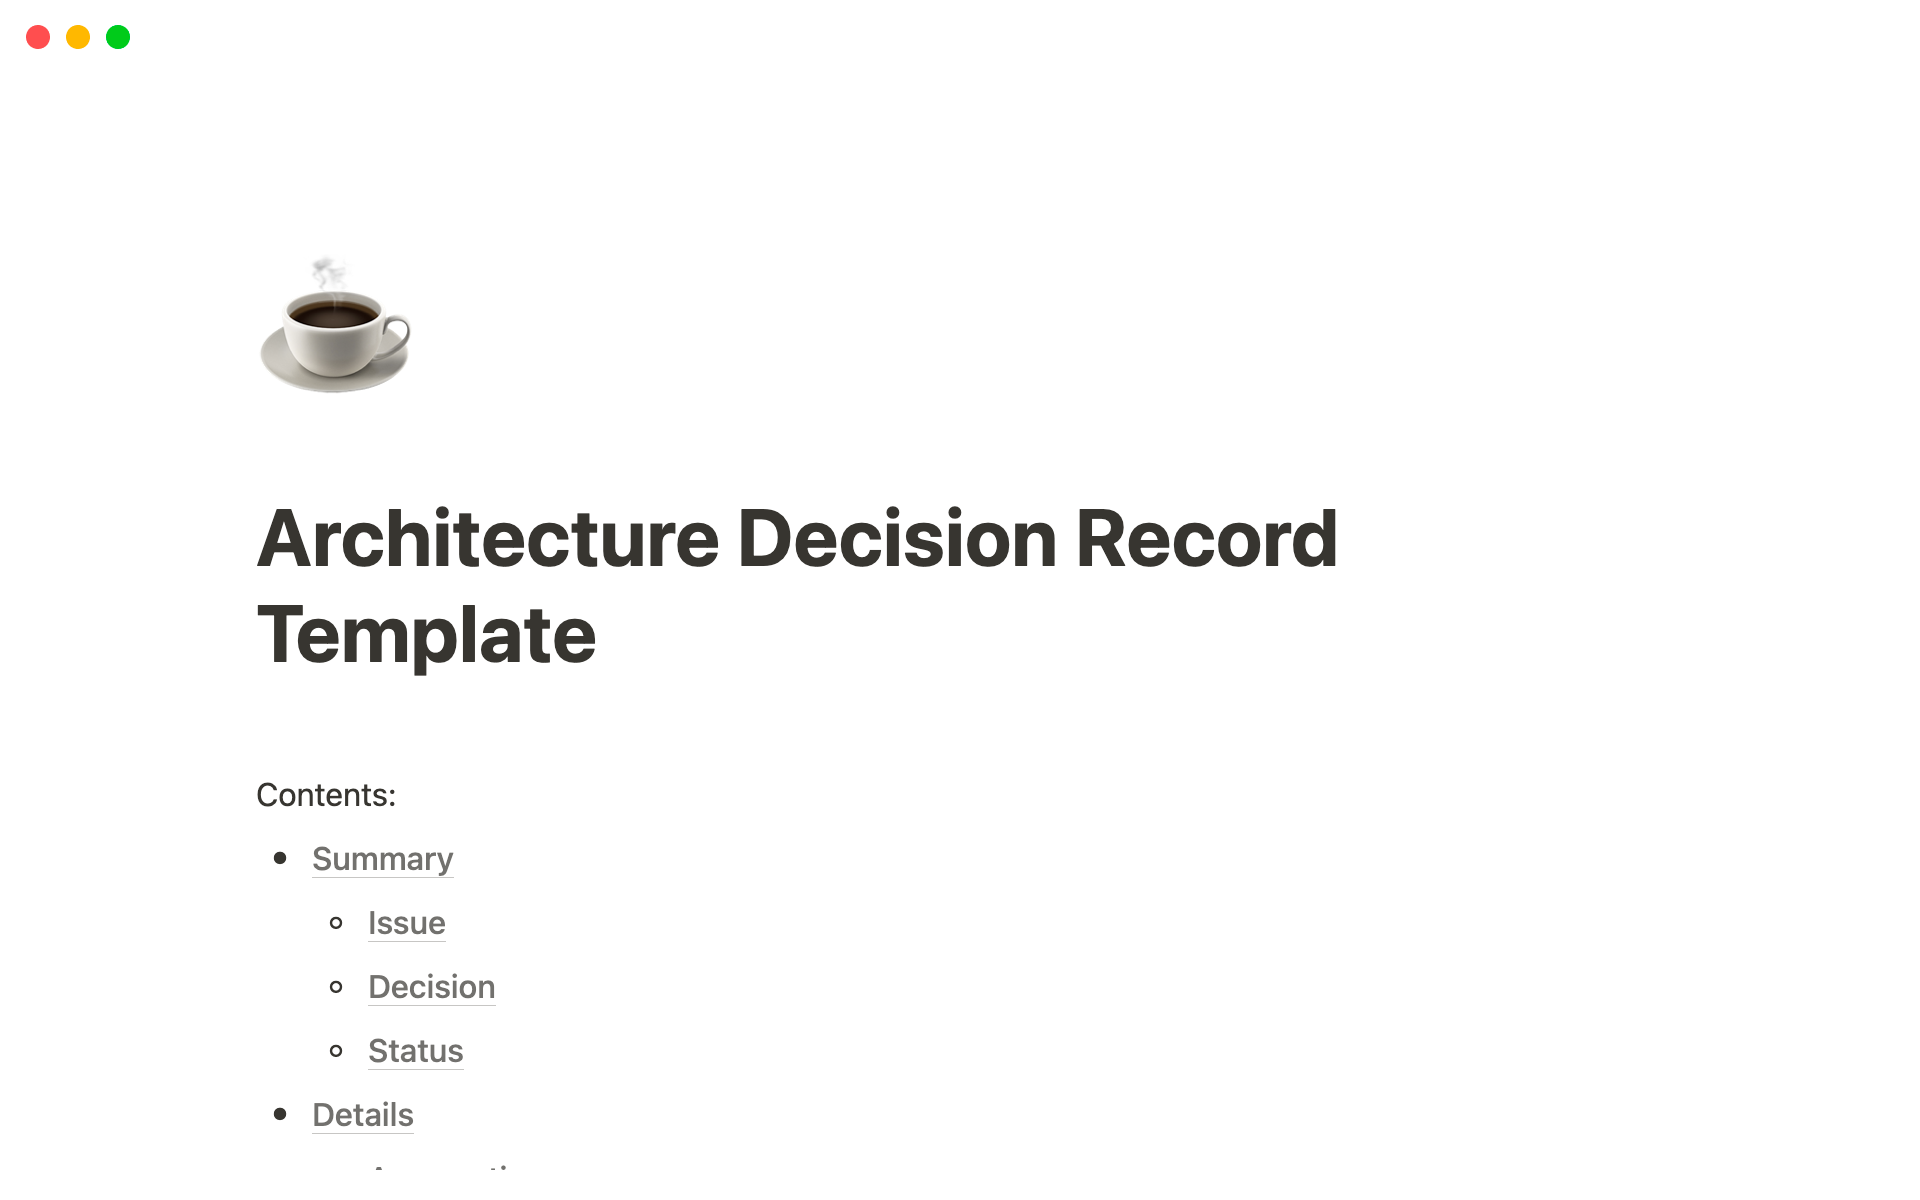 Make better architectural decisions with ease and clarity using our Architecture Decision Record template for Notion!